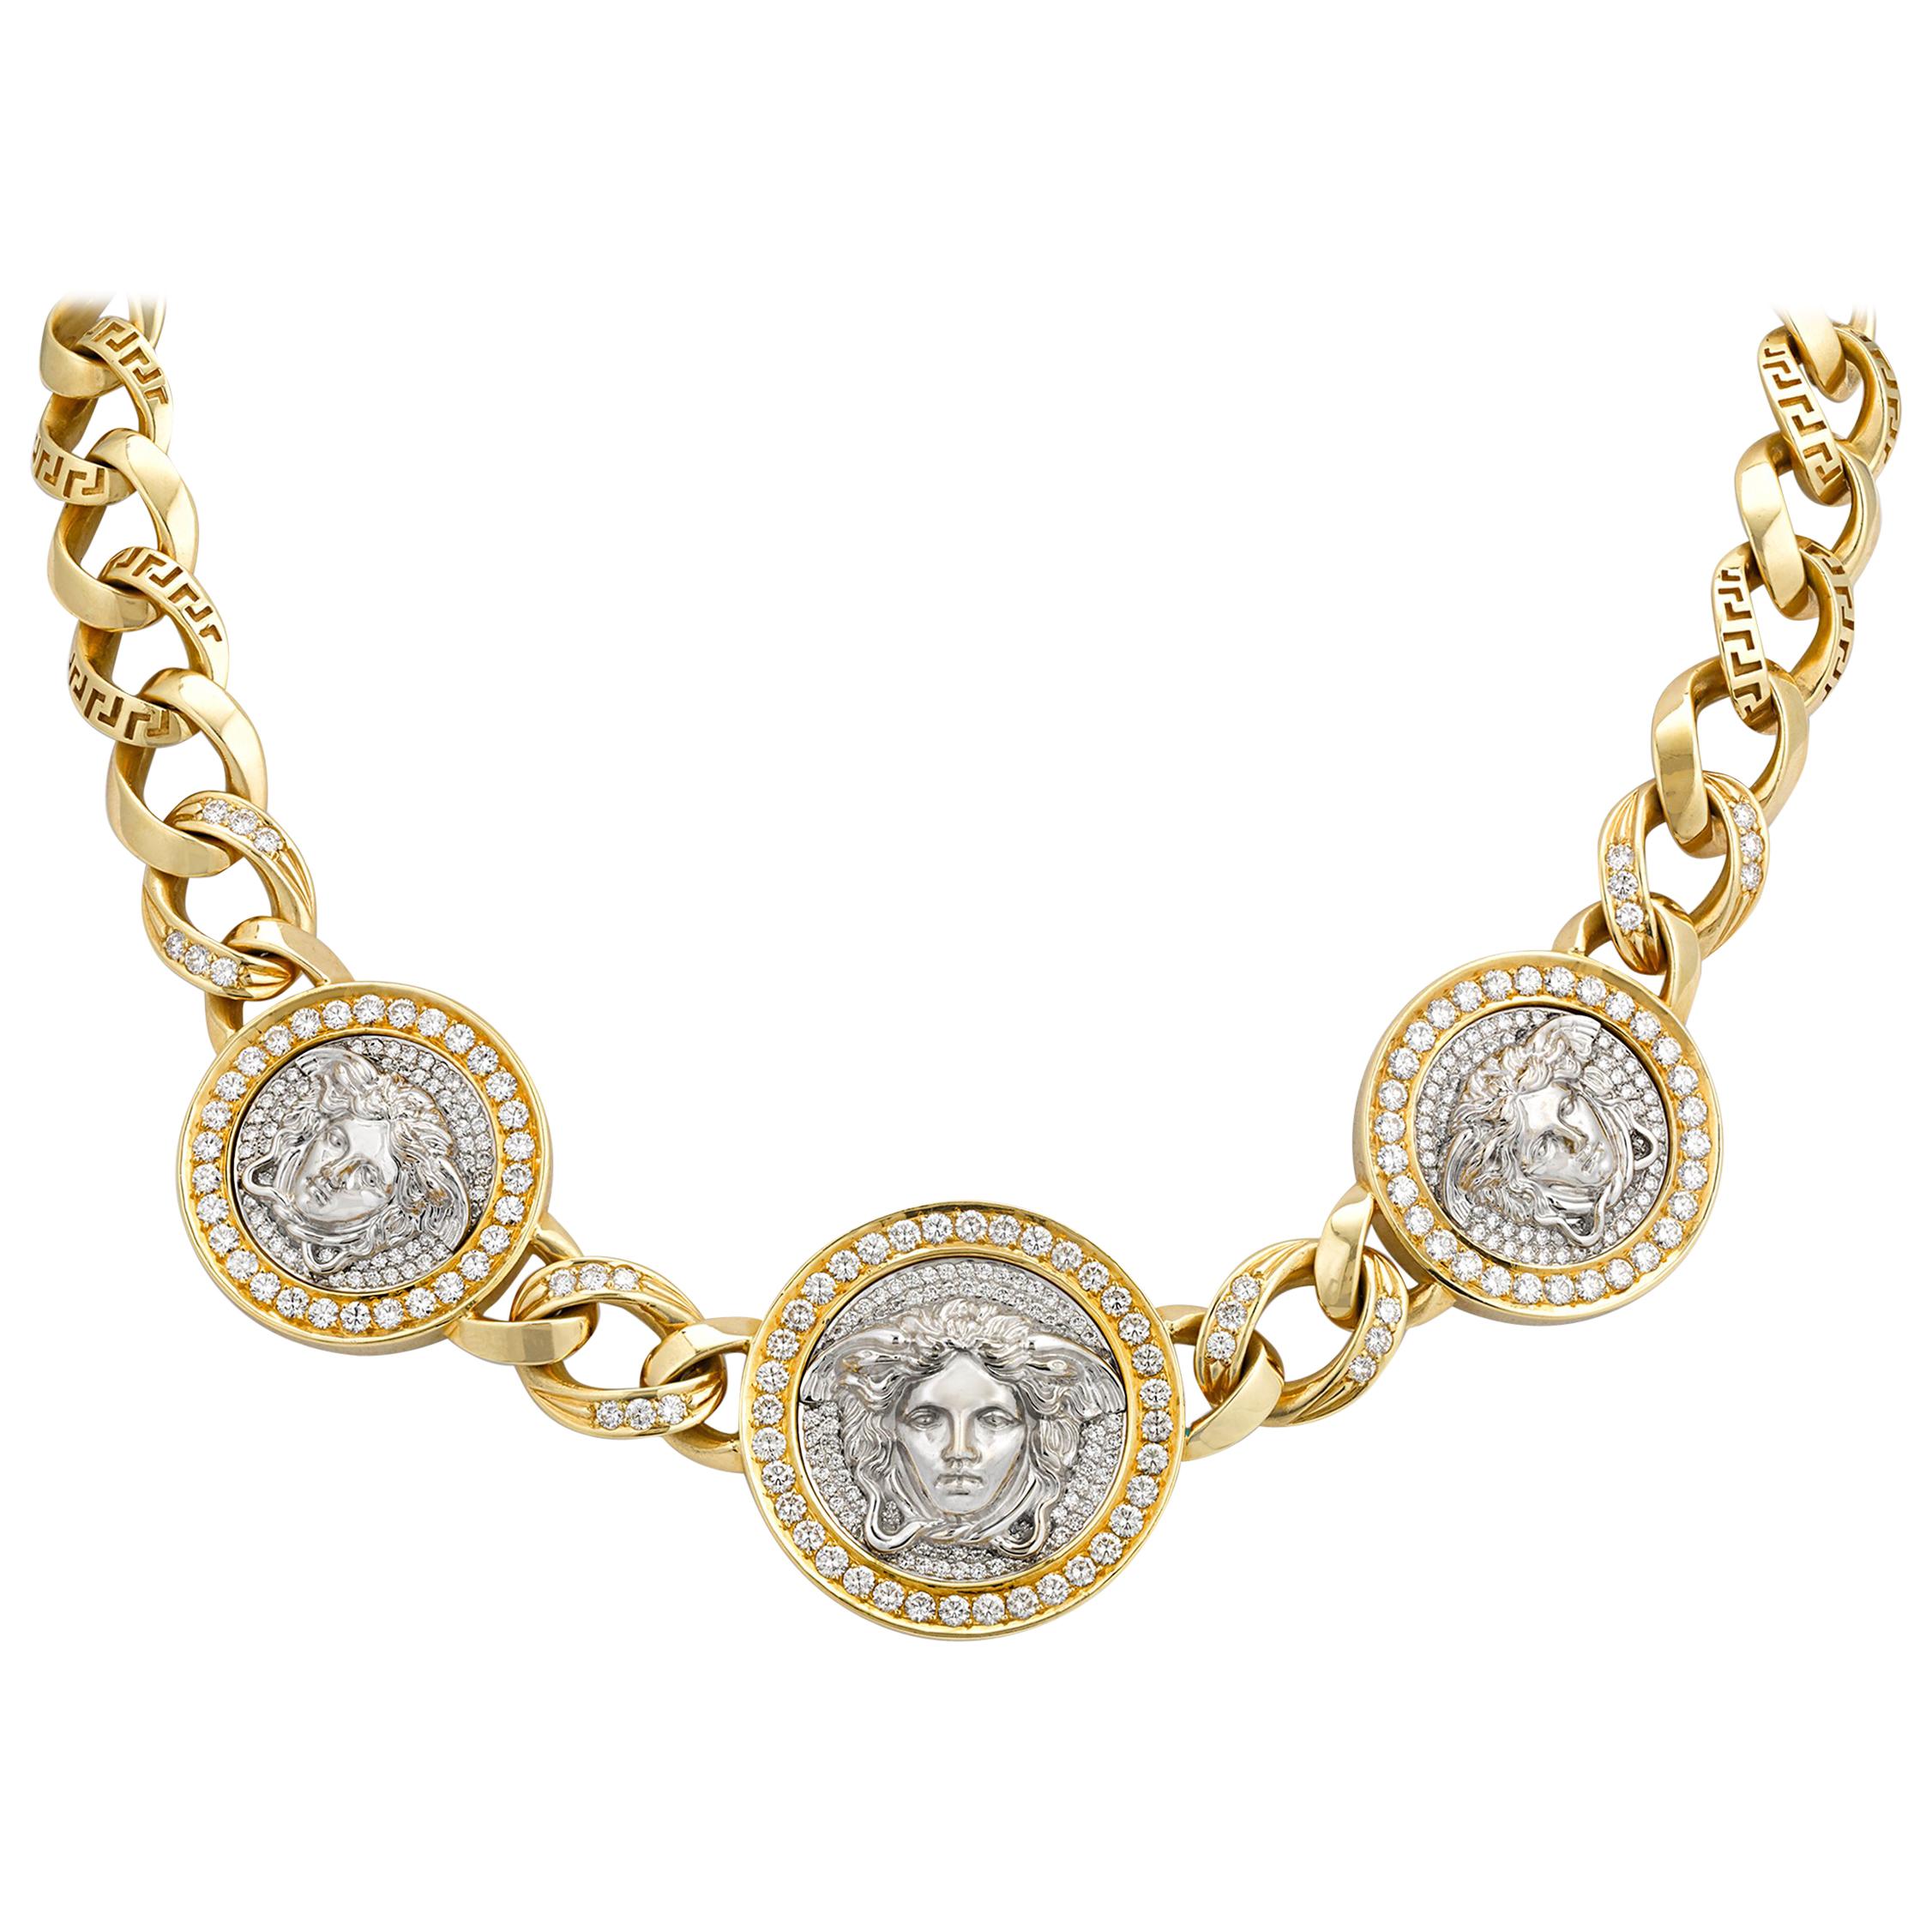 Medusa Gold and Diamond Necklace by Versace